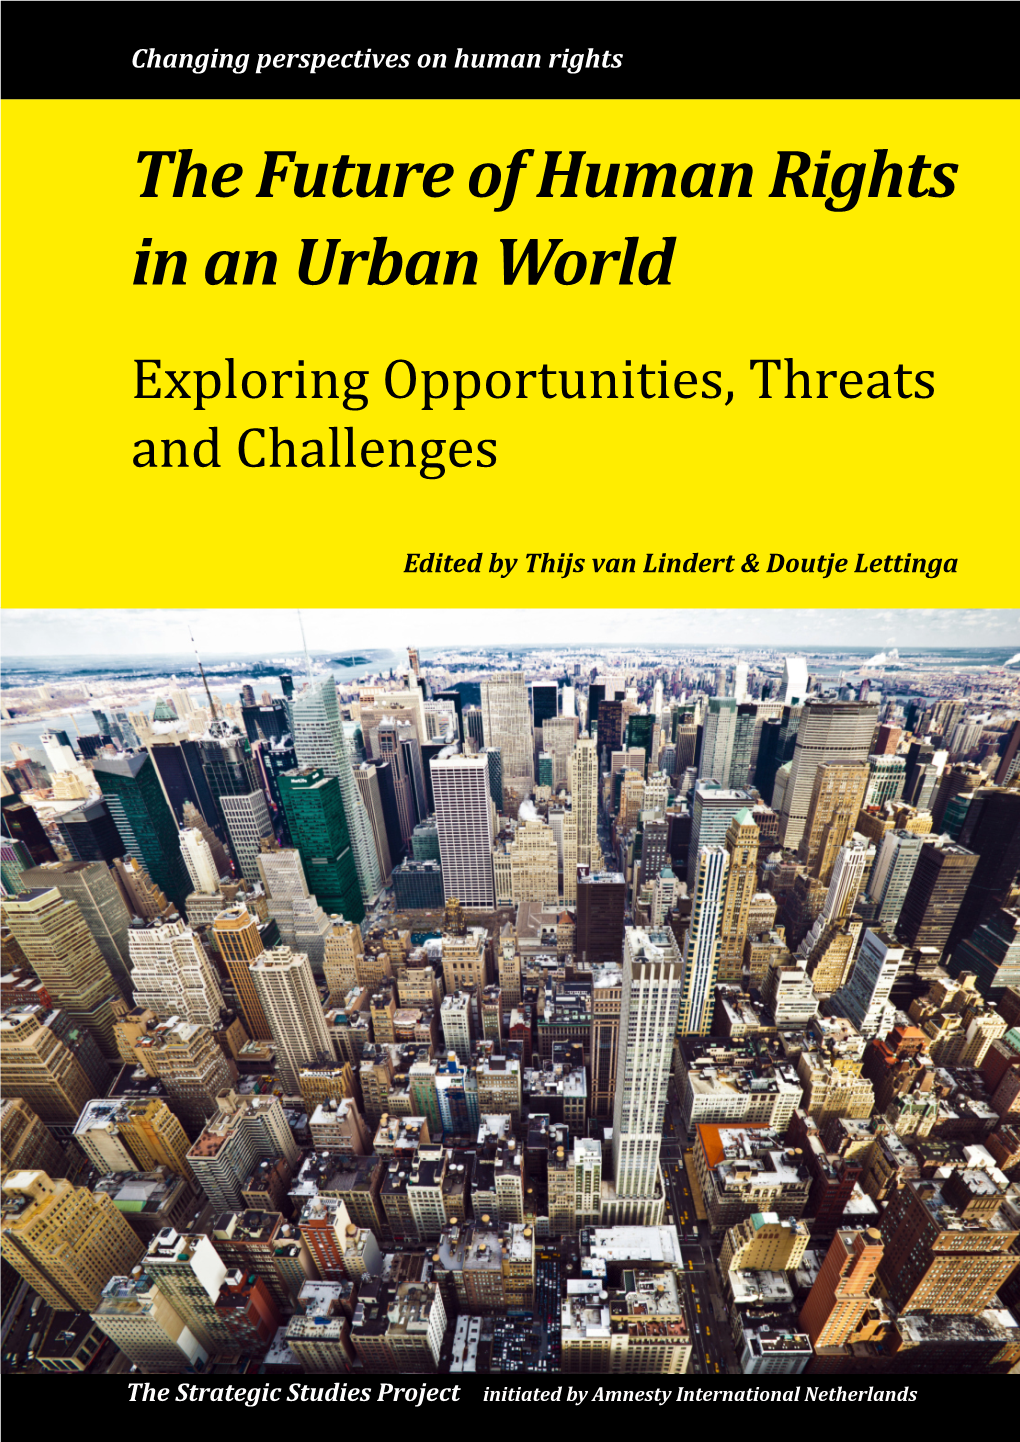 The Future of Human Rights in an Urban World Exploring Opportunities, Threats and Challenges